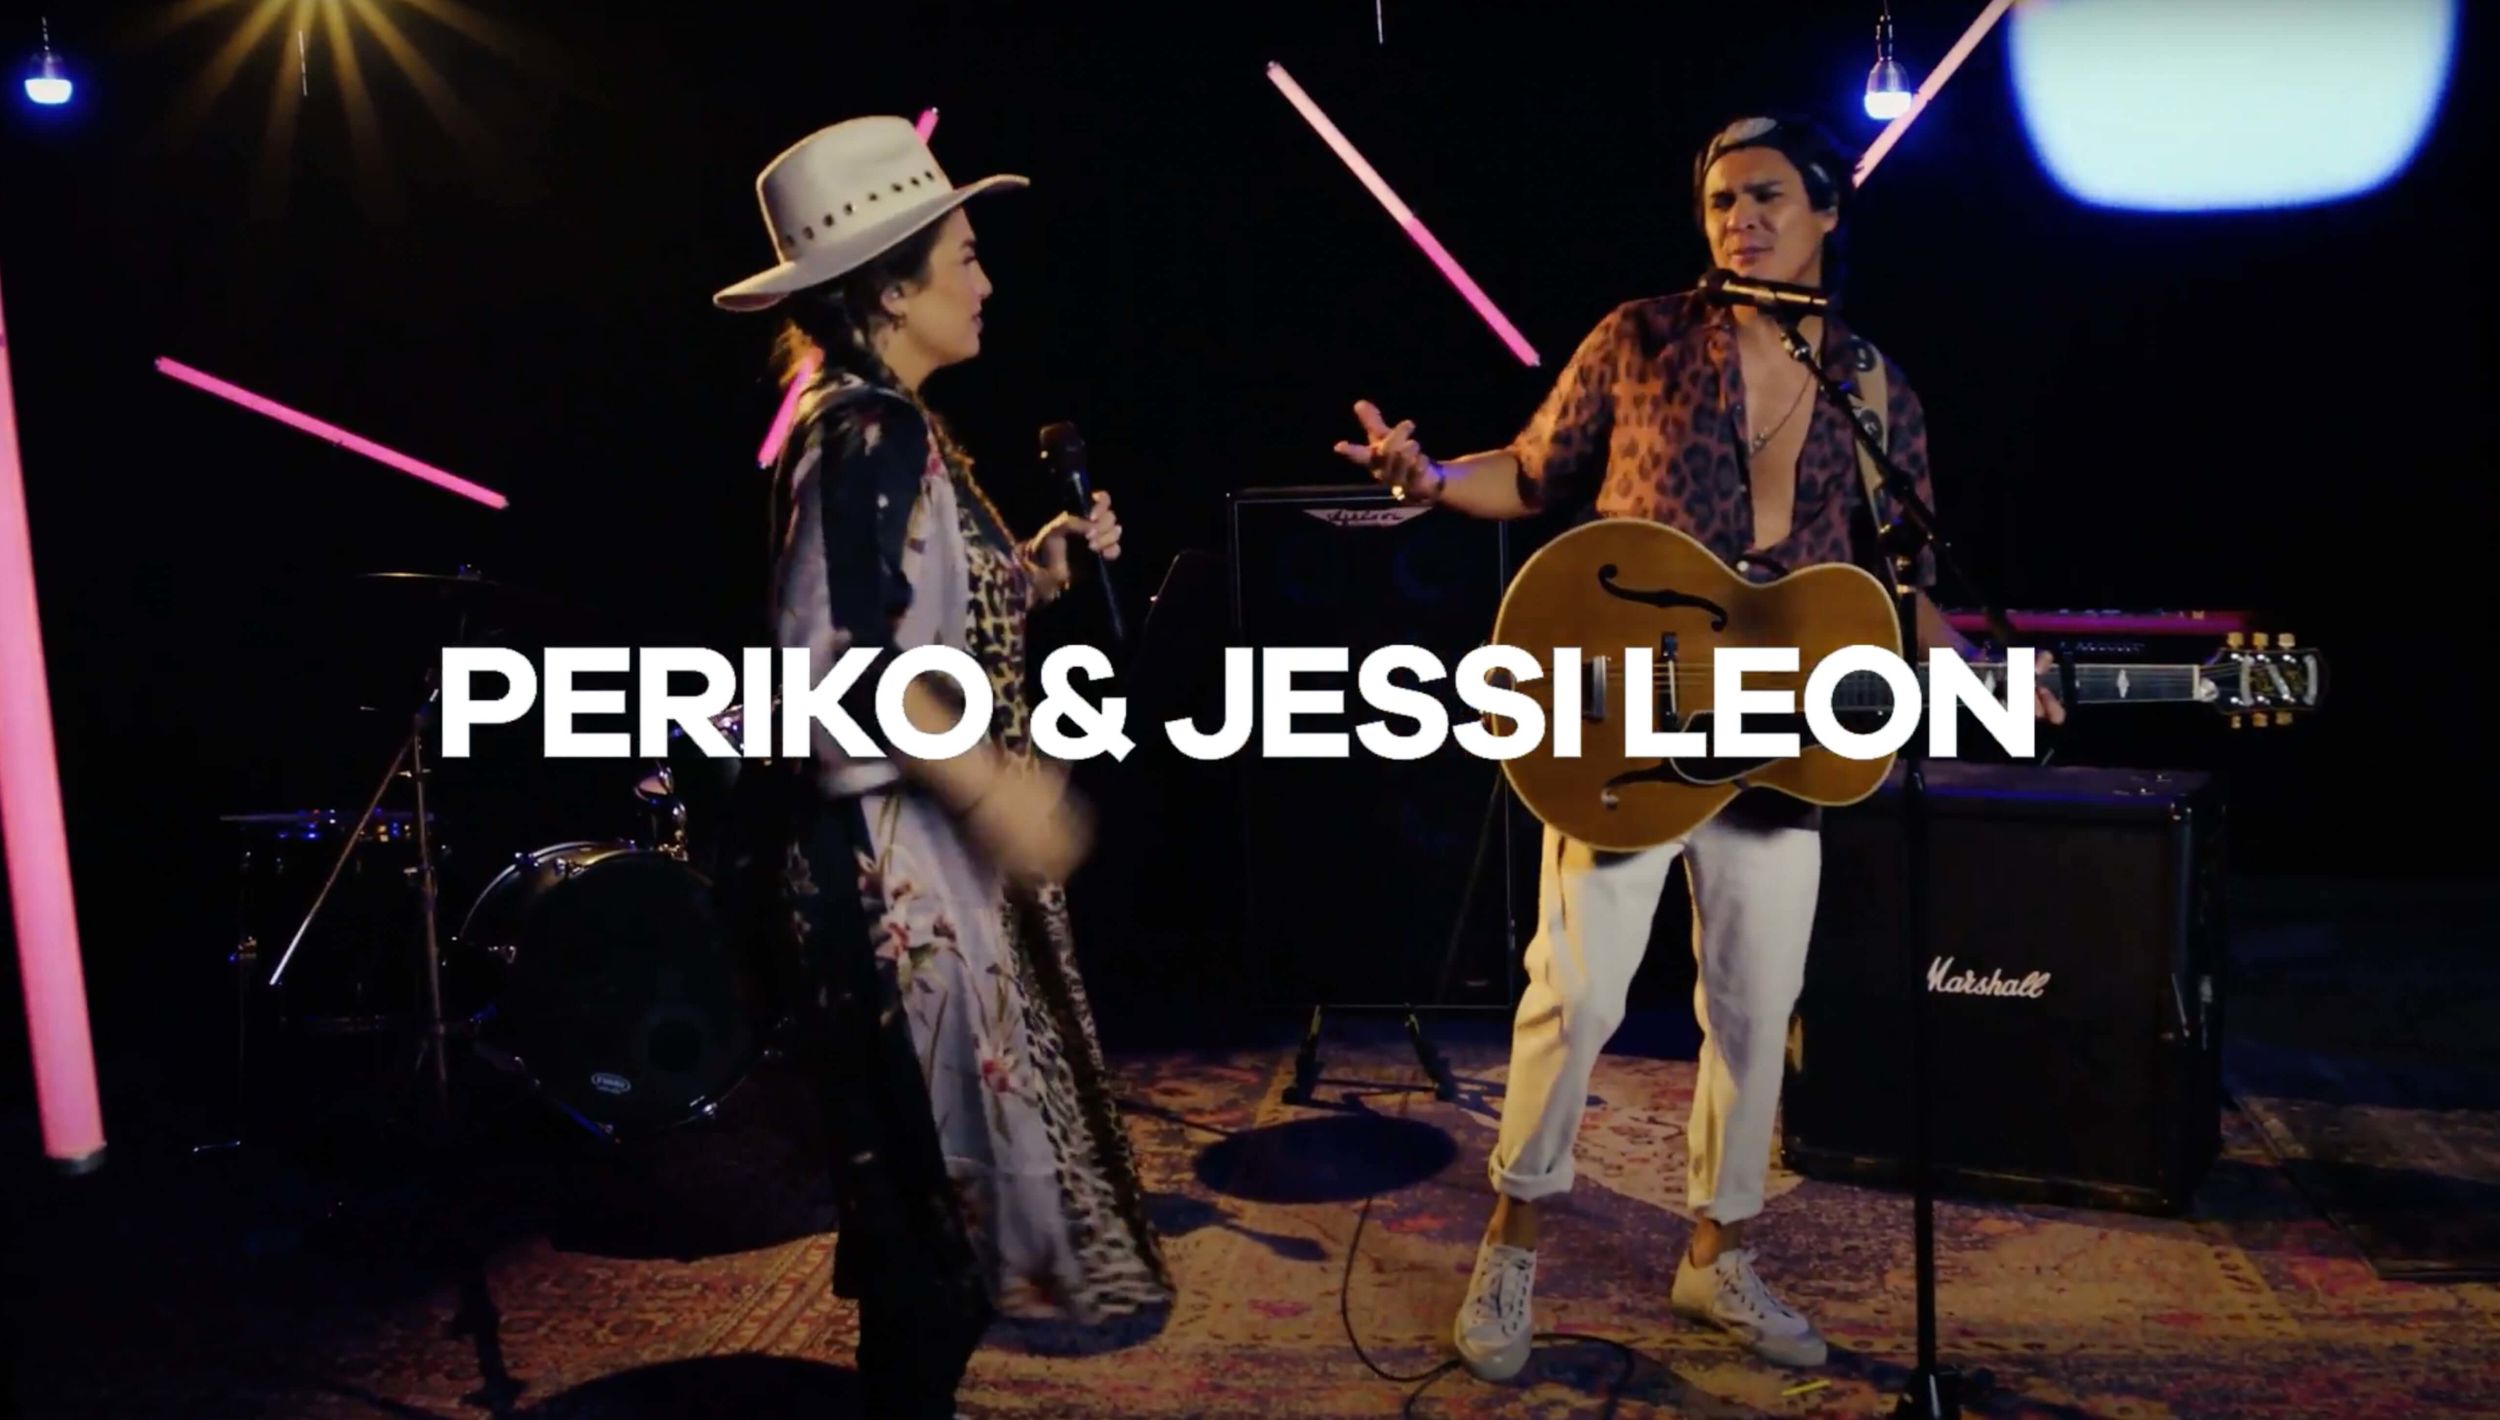 Periko & Jessi Leon performing sing song Exclusivos for our new LA Sessions.